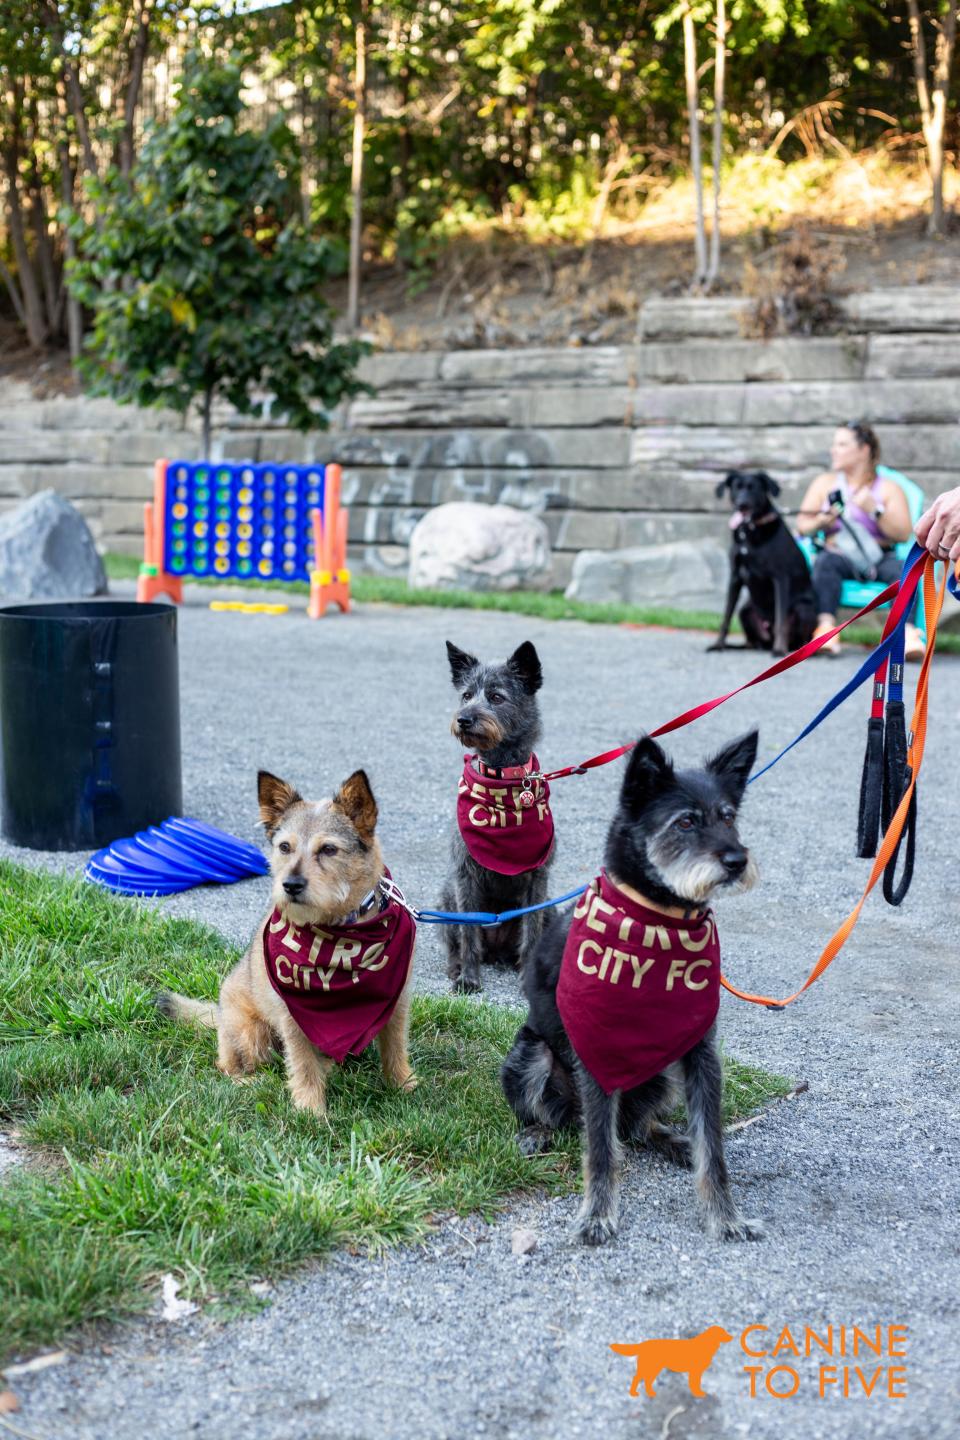 Drinking with Dogs, Canine to Five's annual event that invites owners to bring their dogs to local bars begins May 21 and runs through October.